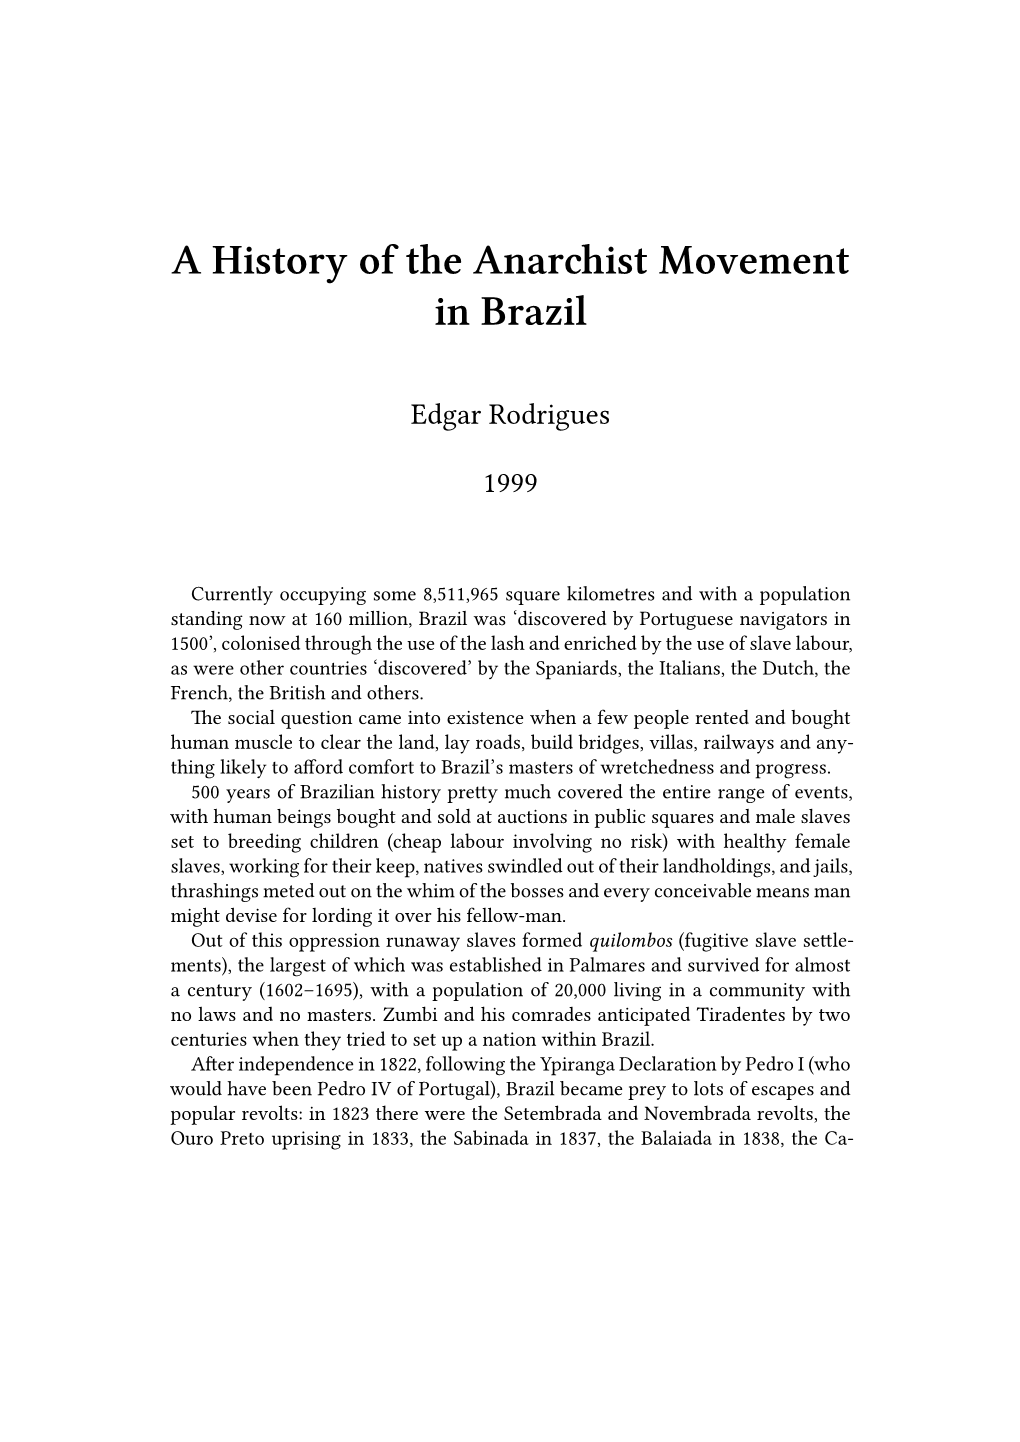 History of the Anarchist Movement in Brazil